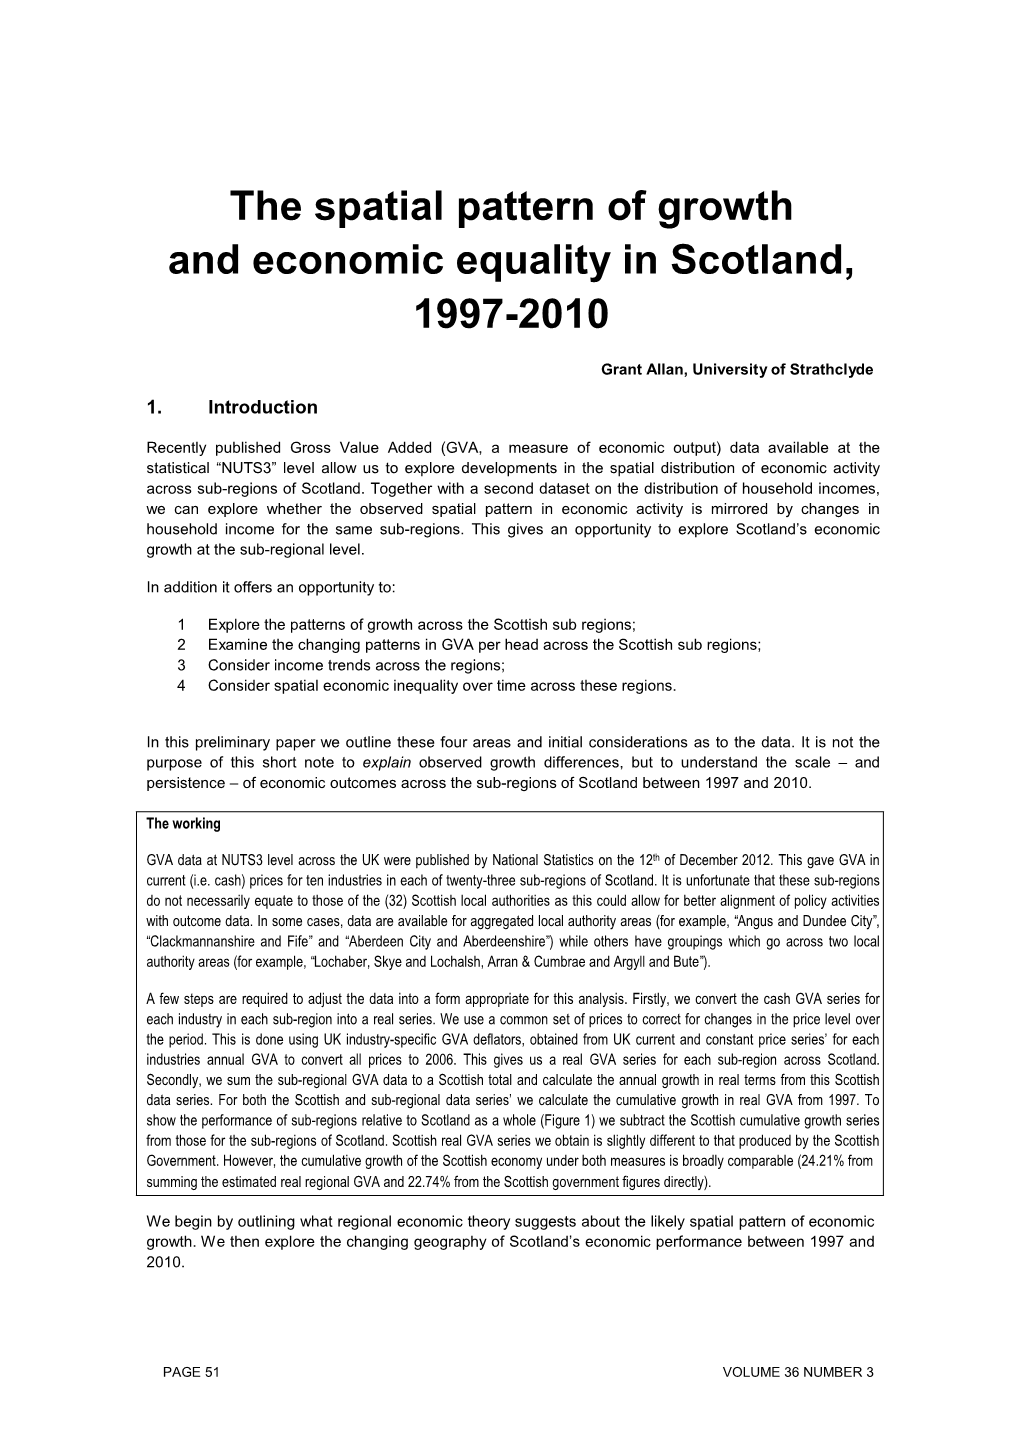 The Spatial Pattern of Growth and Economic Equality in Scotland, 1997-2010